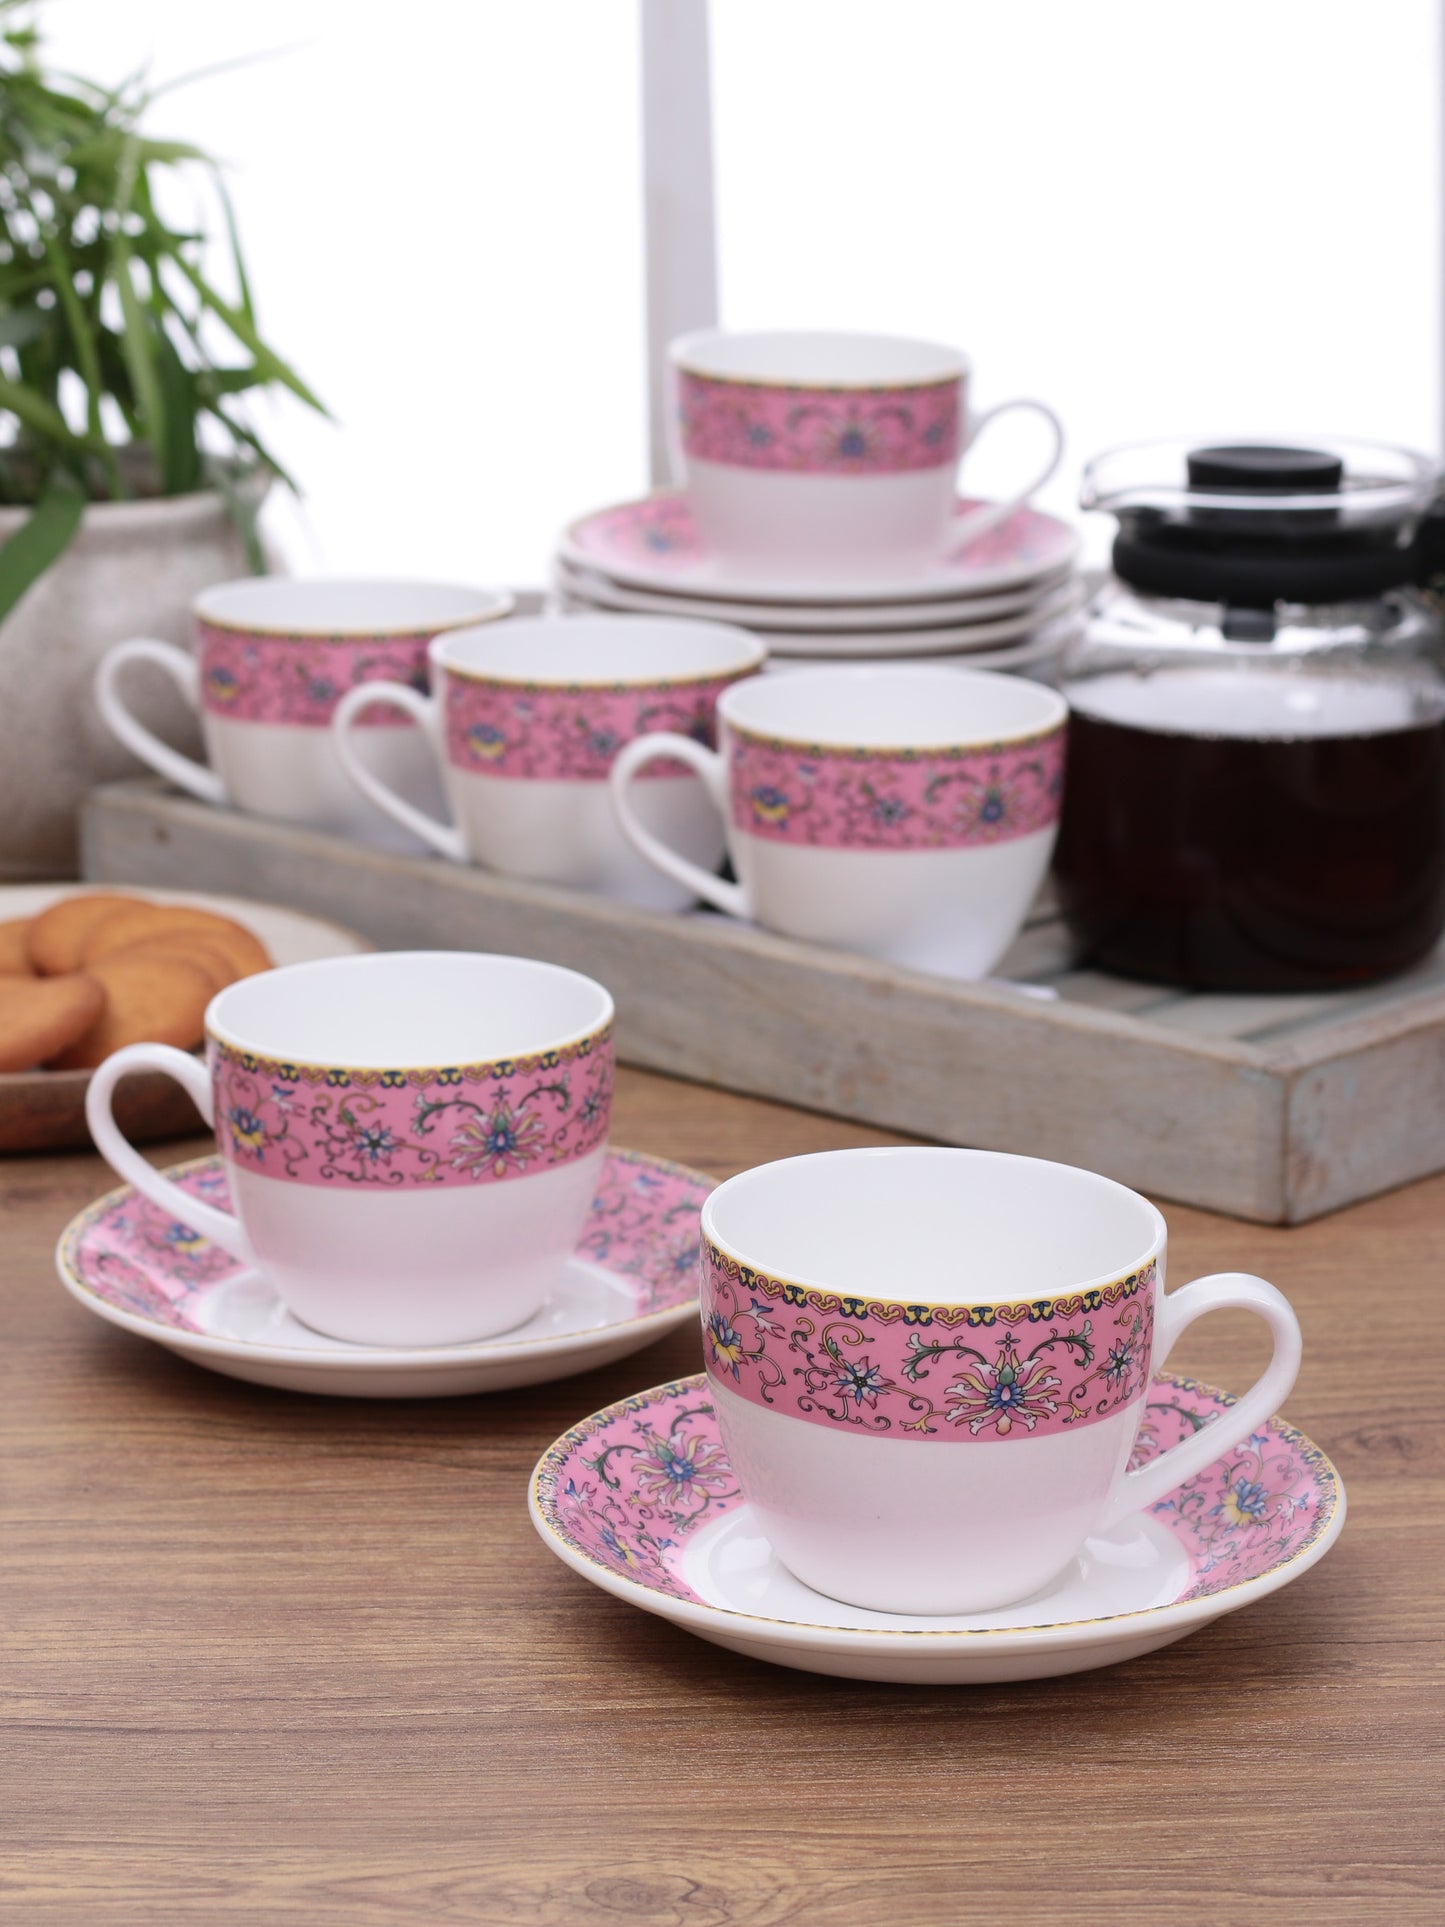 Cream Rose Cup & Saucer, 210ml, Set of 12 (6 Cups + 6 Saucers) (R112)